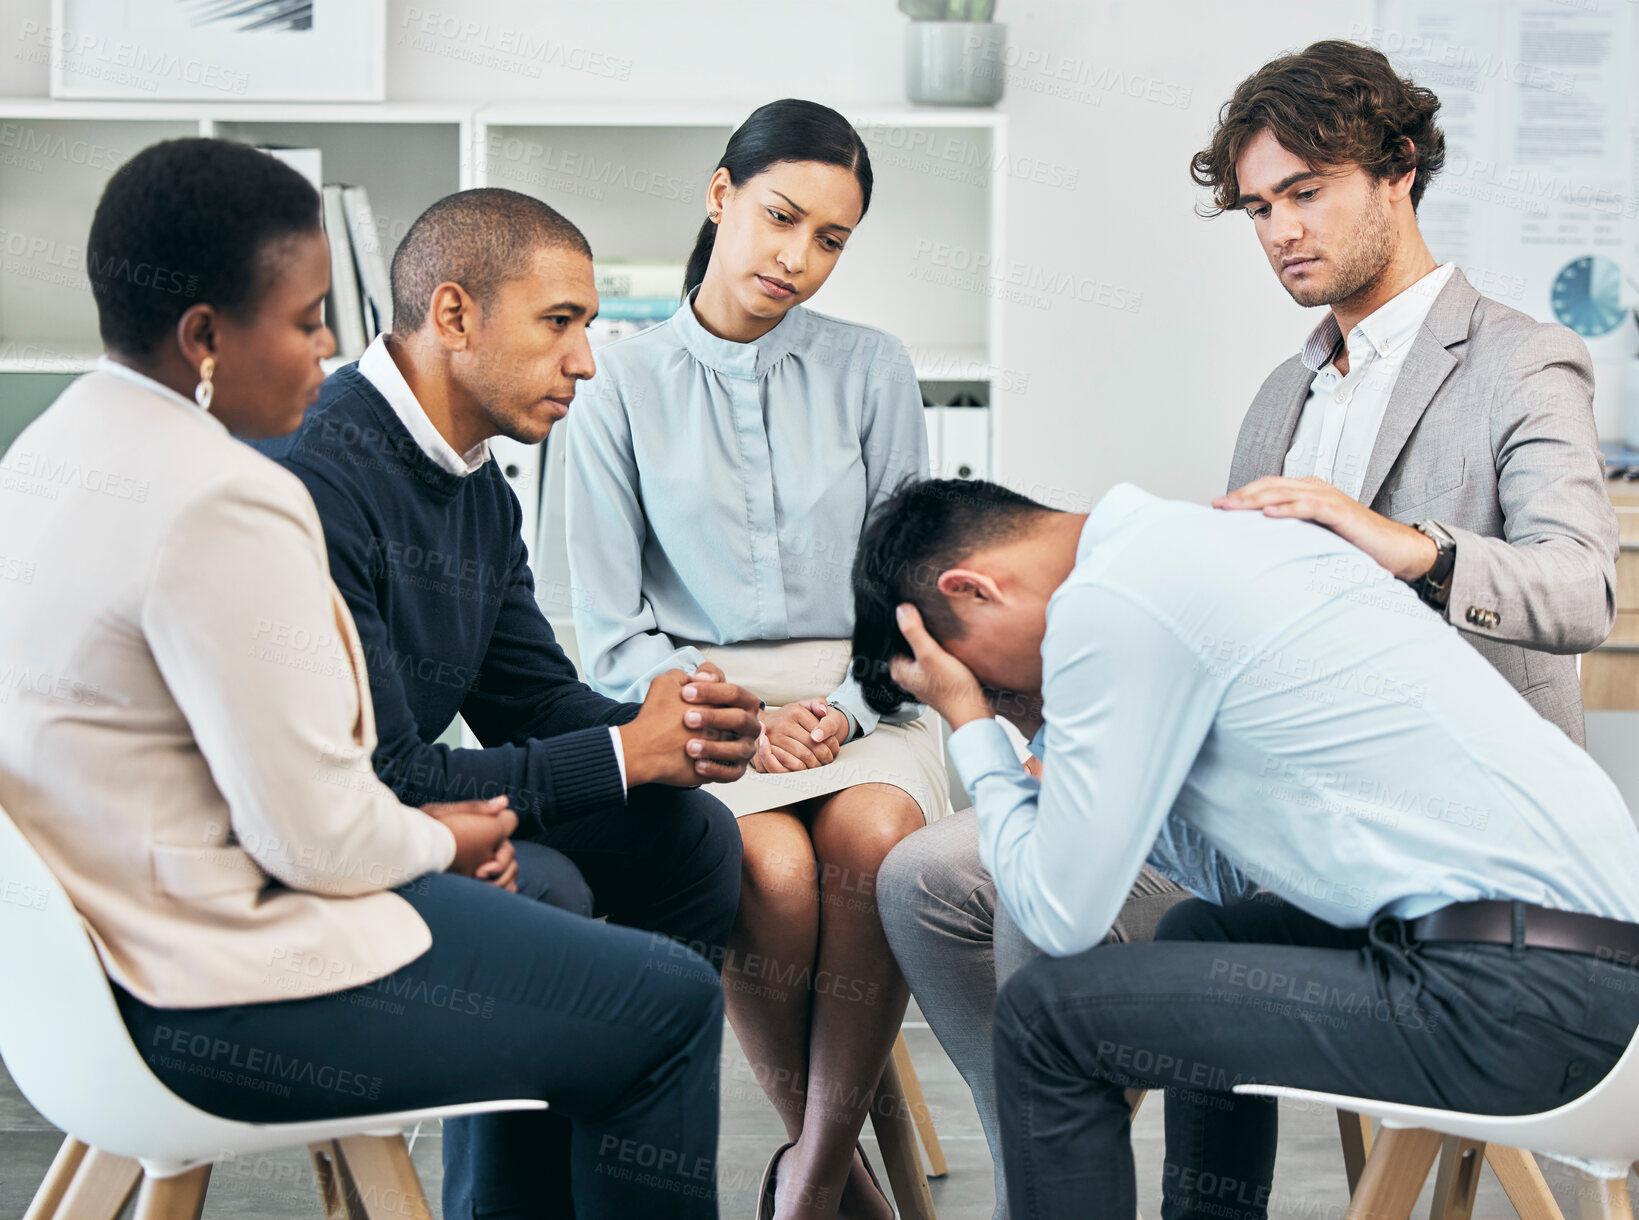 Buy stock photo Depression, support and unity by colleagues comforting male after getting bad news at work. Community care from workers sitting together, supporting their friend after being fired or through grief